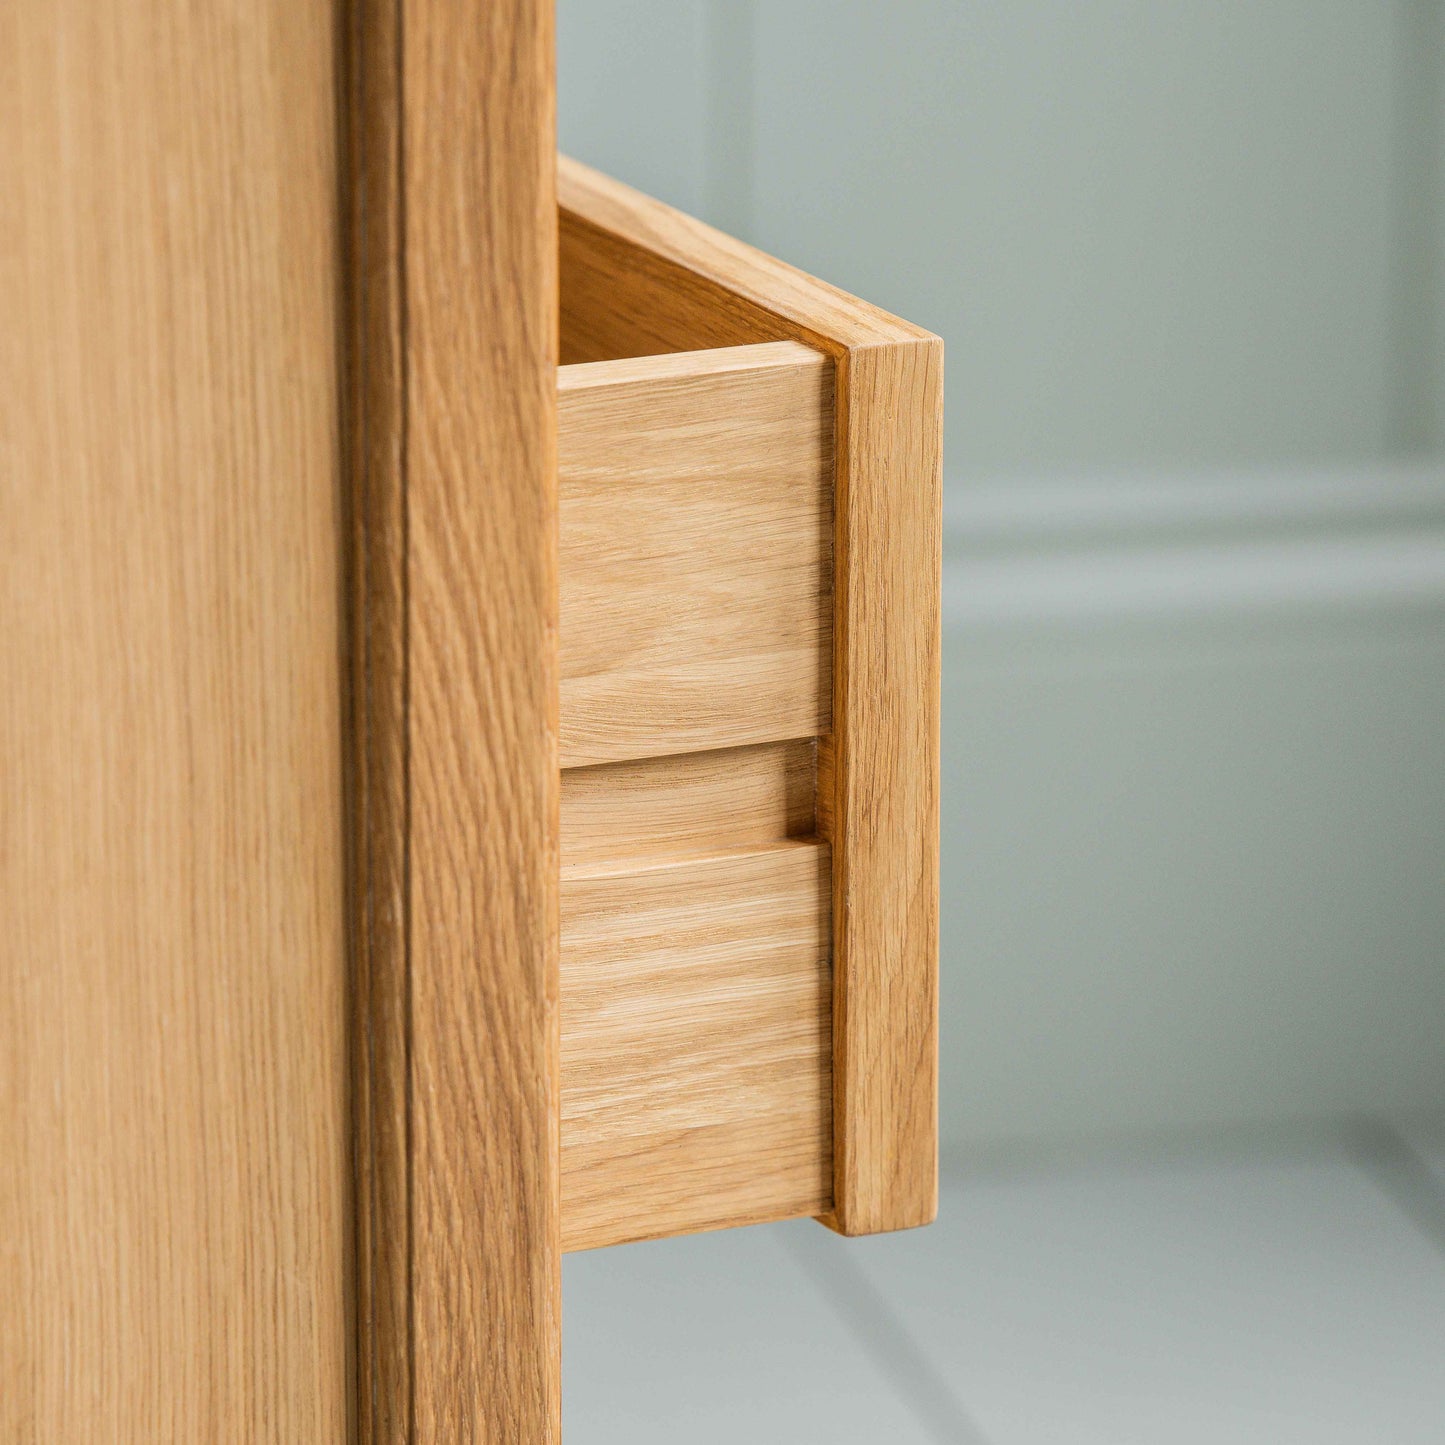 Shipshape Chest of Drawers, Natural Oak